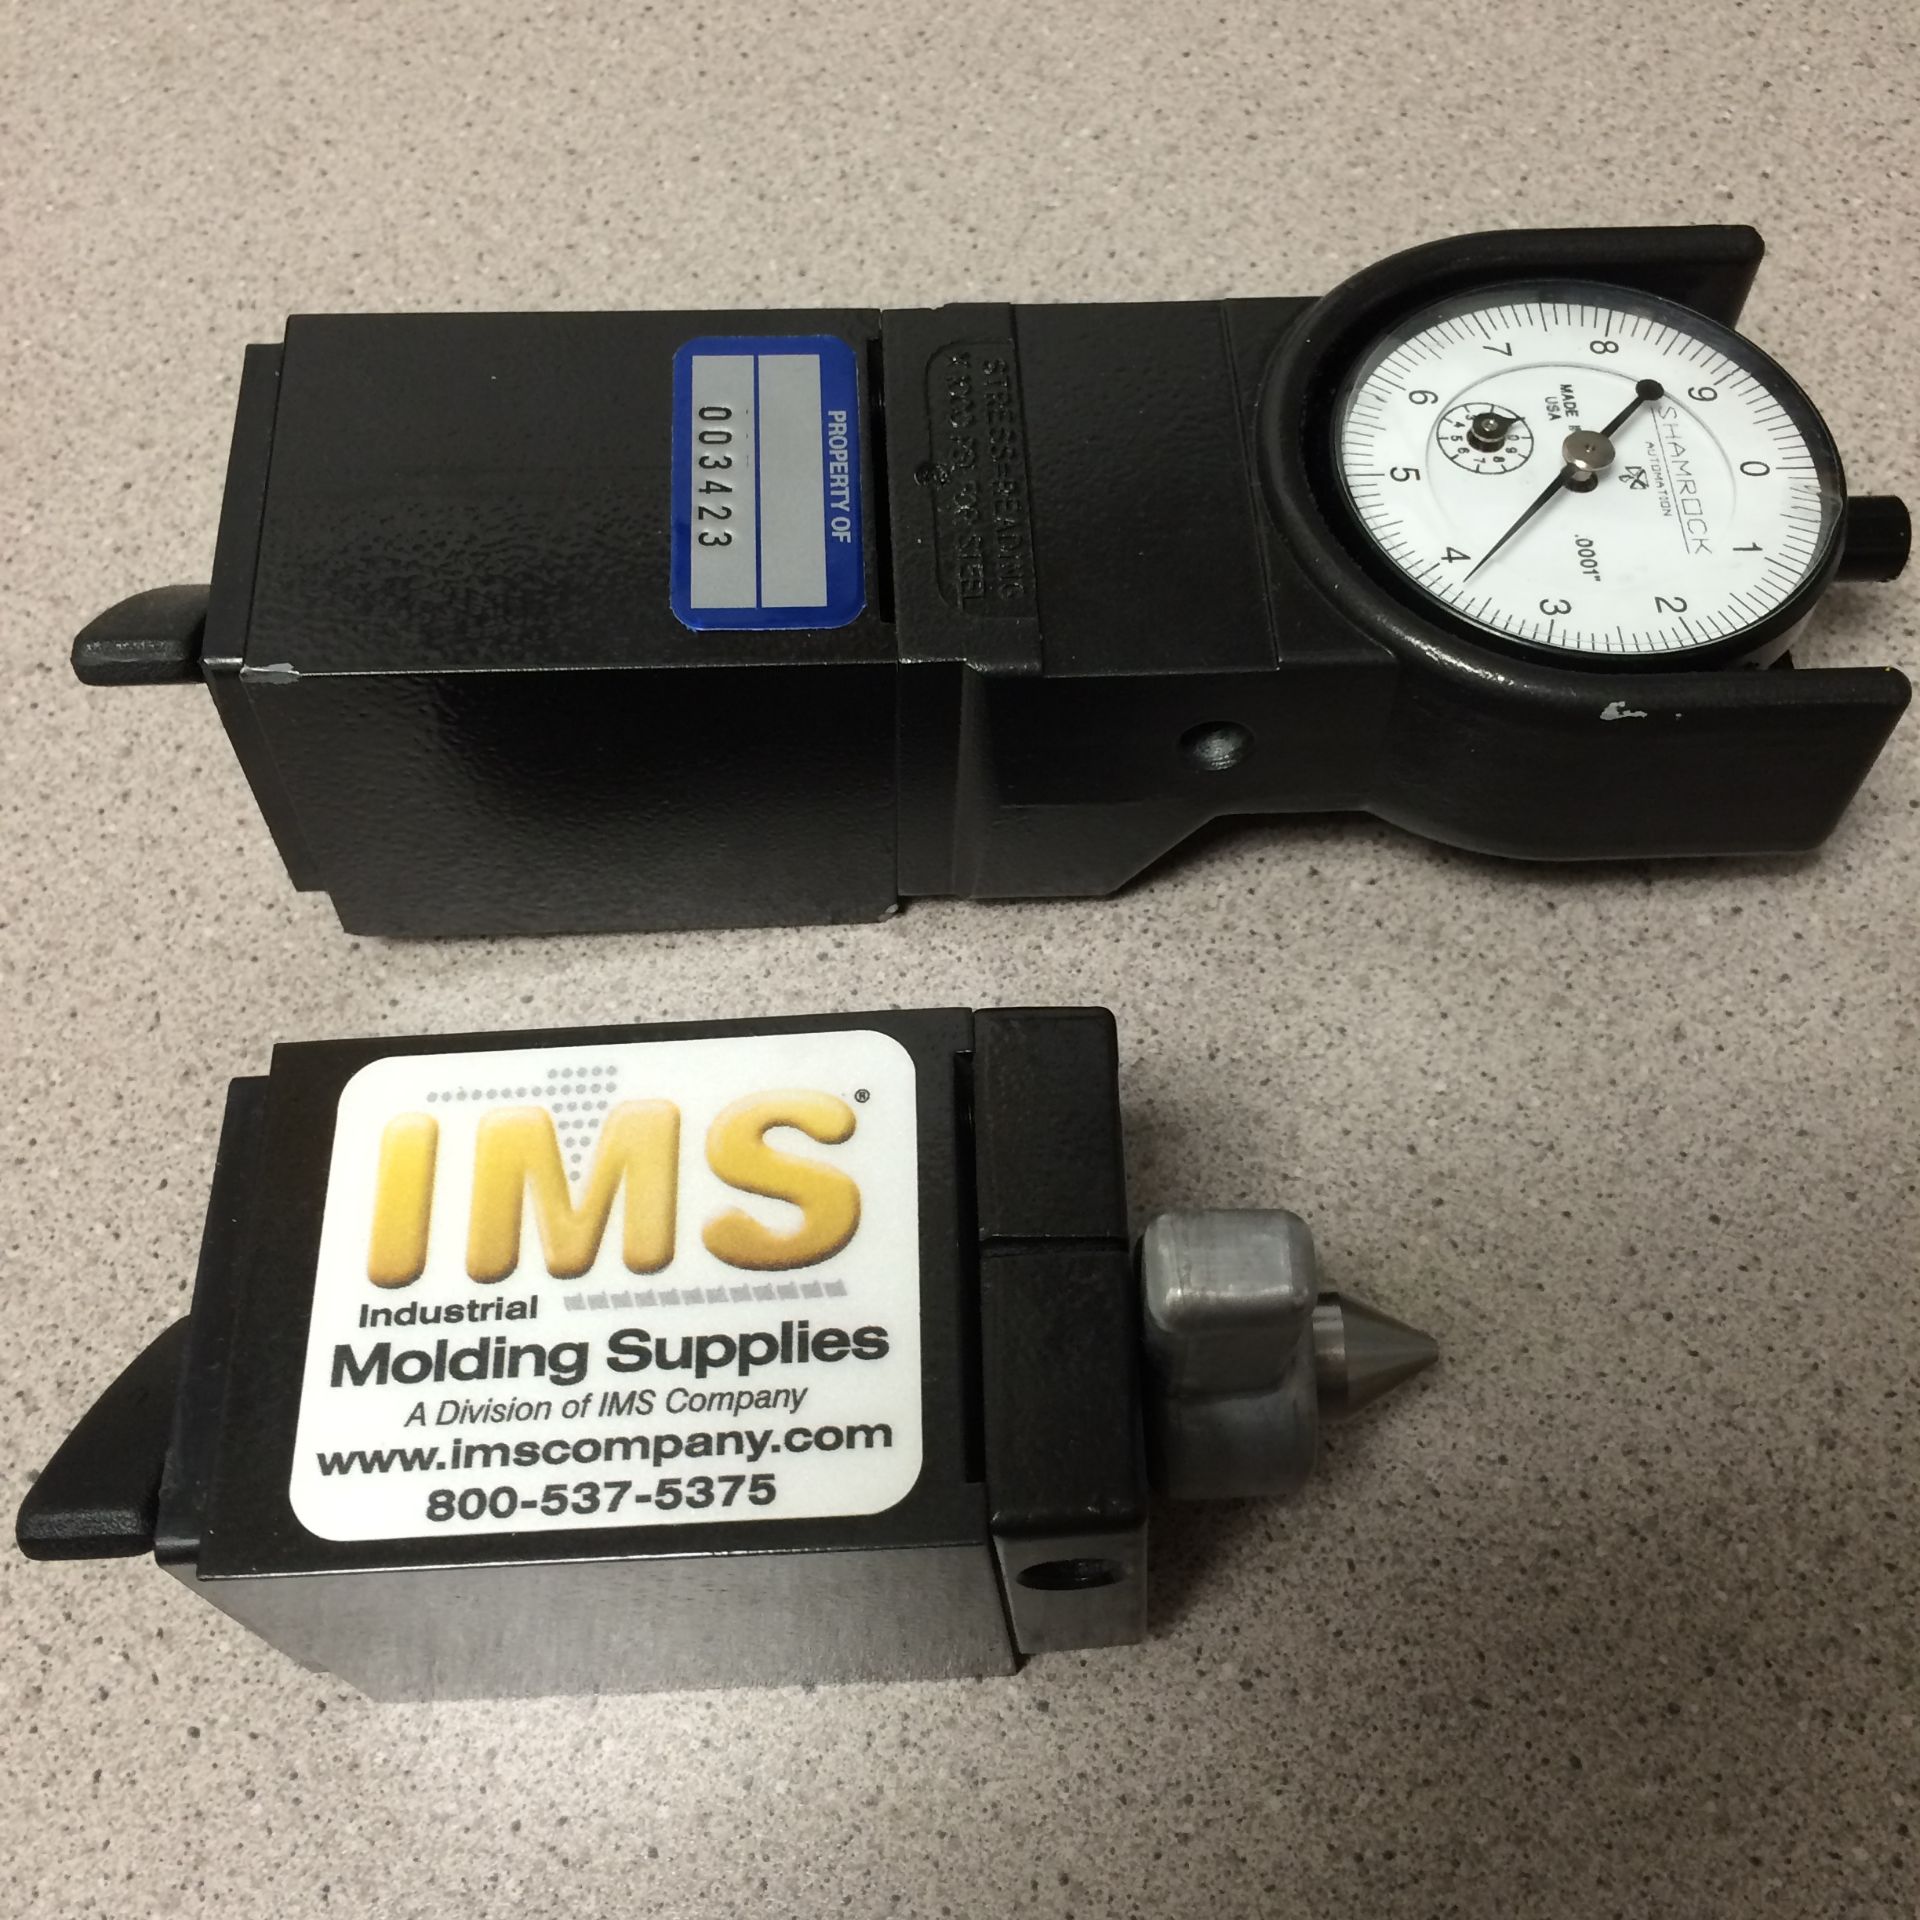 IMS Tie Bar Strain Guage Tester w/ Case for 125+ Ton Injection Molding Machines - Image 2 of 4